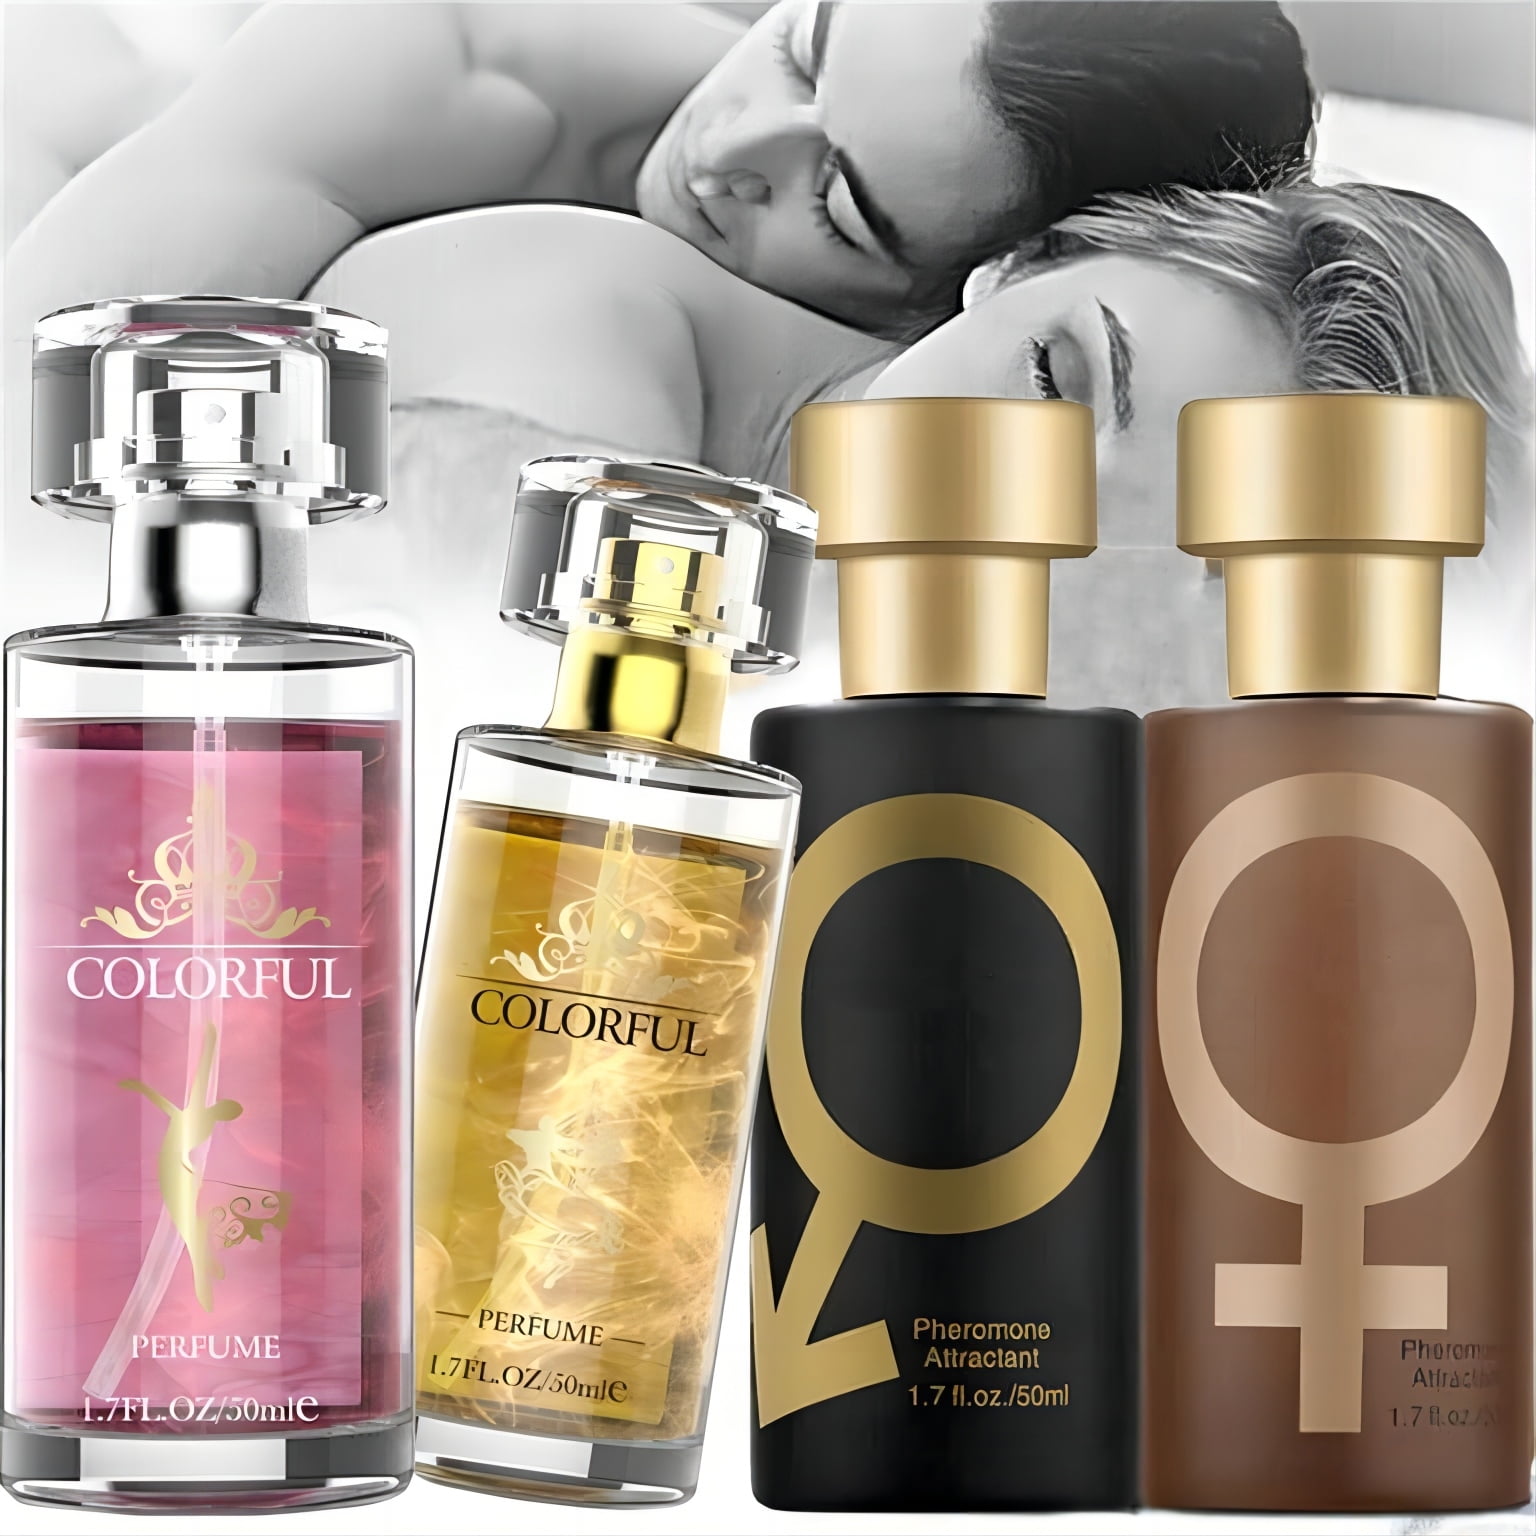  Sex Pheromone Intimate Partner Perfume, Intimate Partner  Fragrance, Pheromone Oil for Women To Attract Men, Entice and Ensnare the  Man of Your Dreams : Health & Household